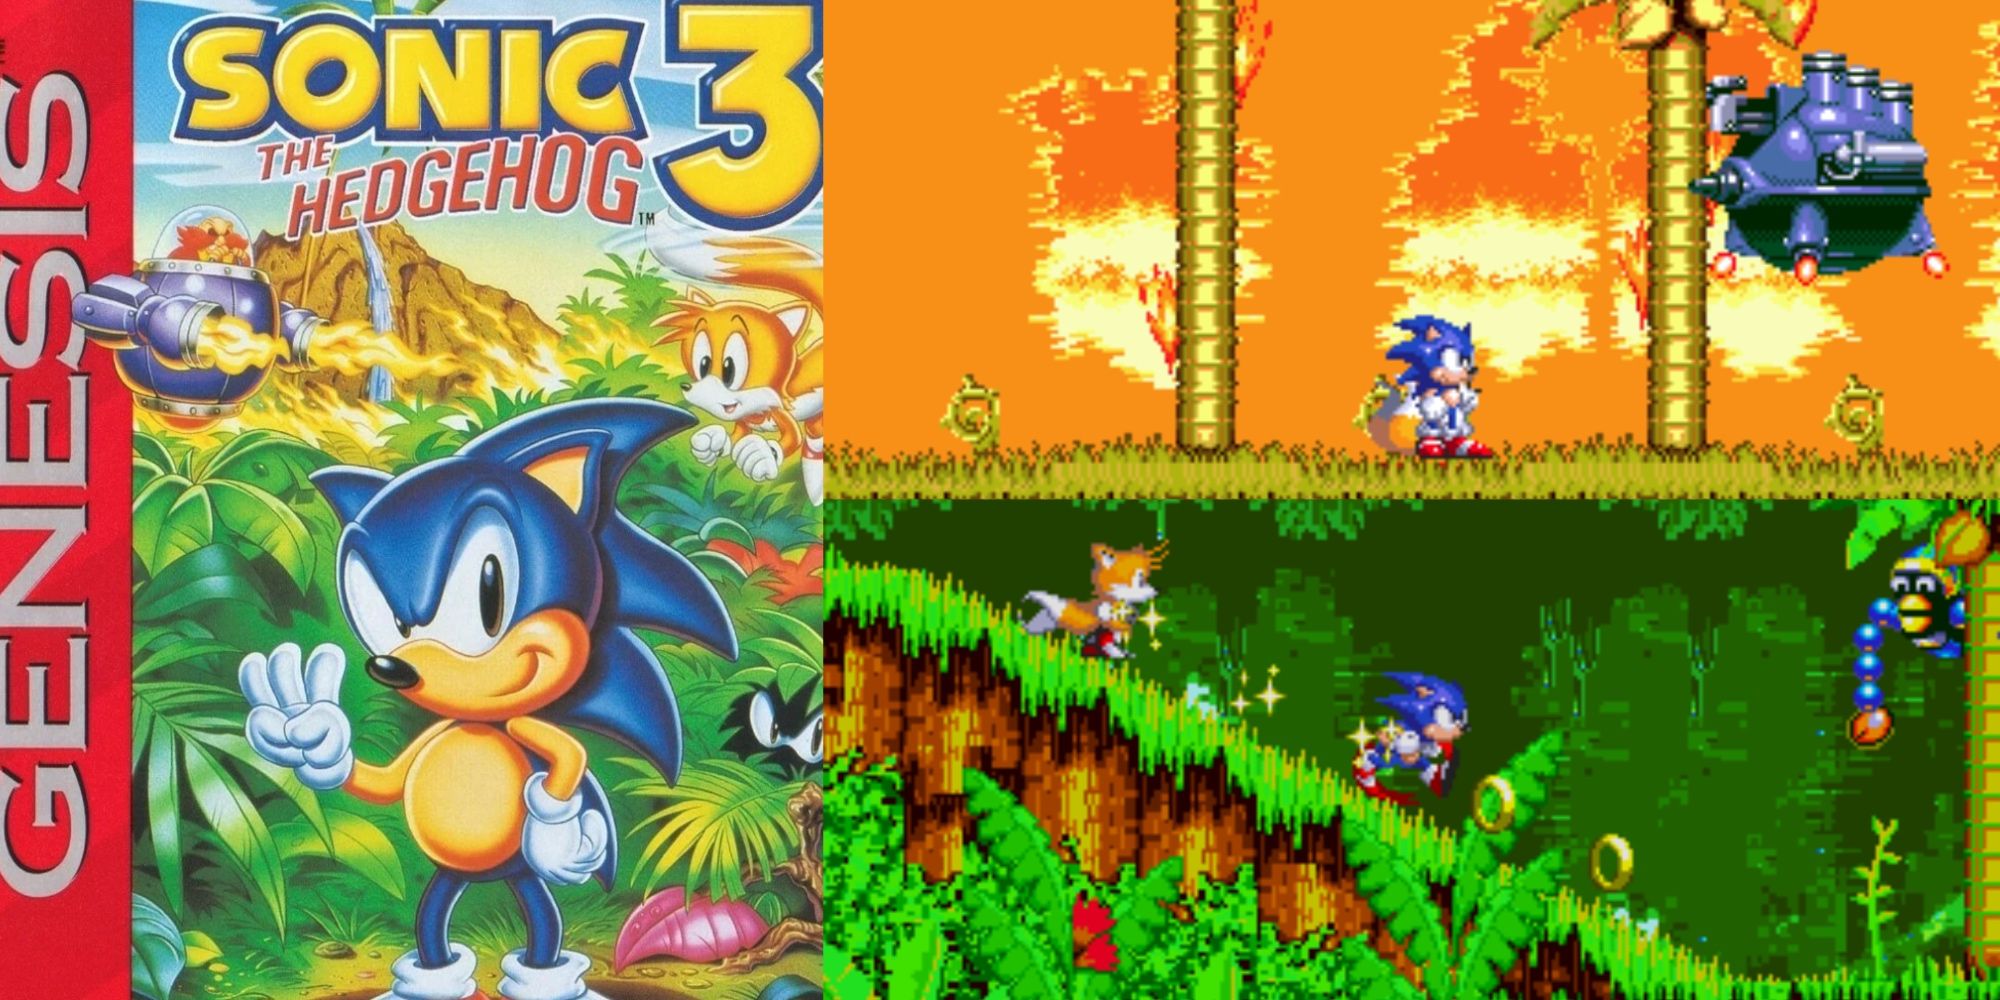 screenshots and cover art for Sonic the hedgehog 3 1994